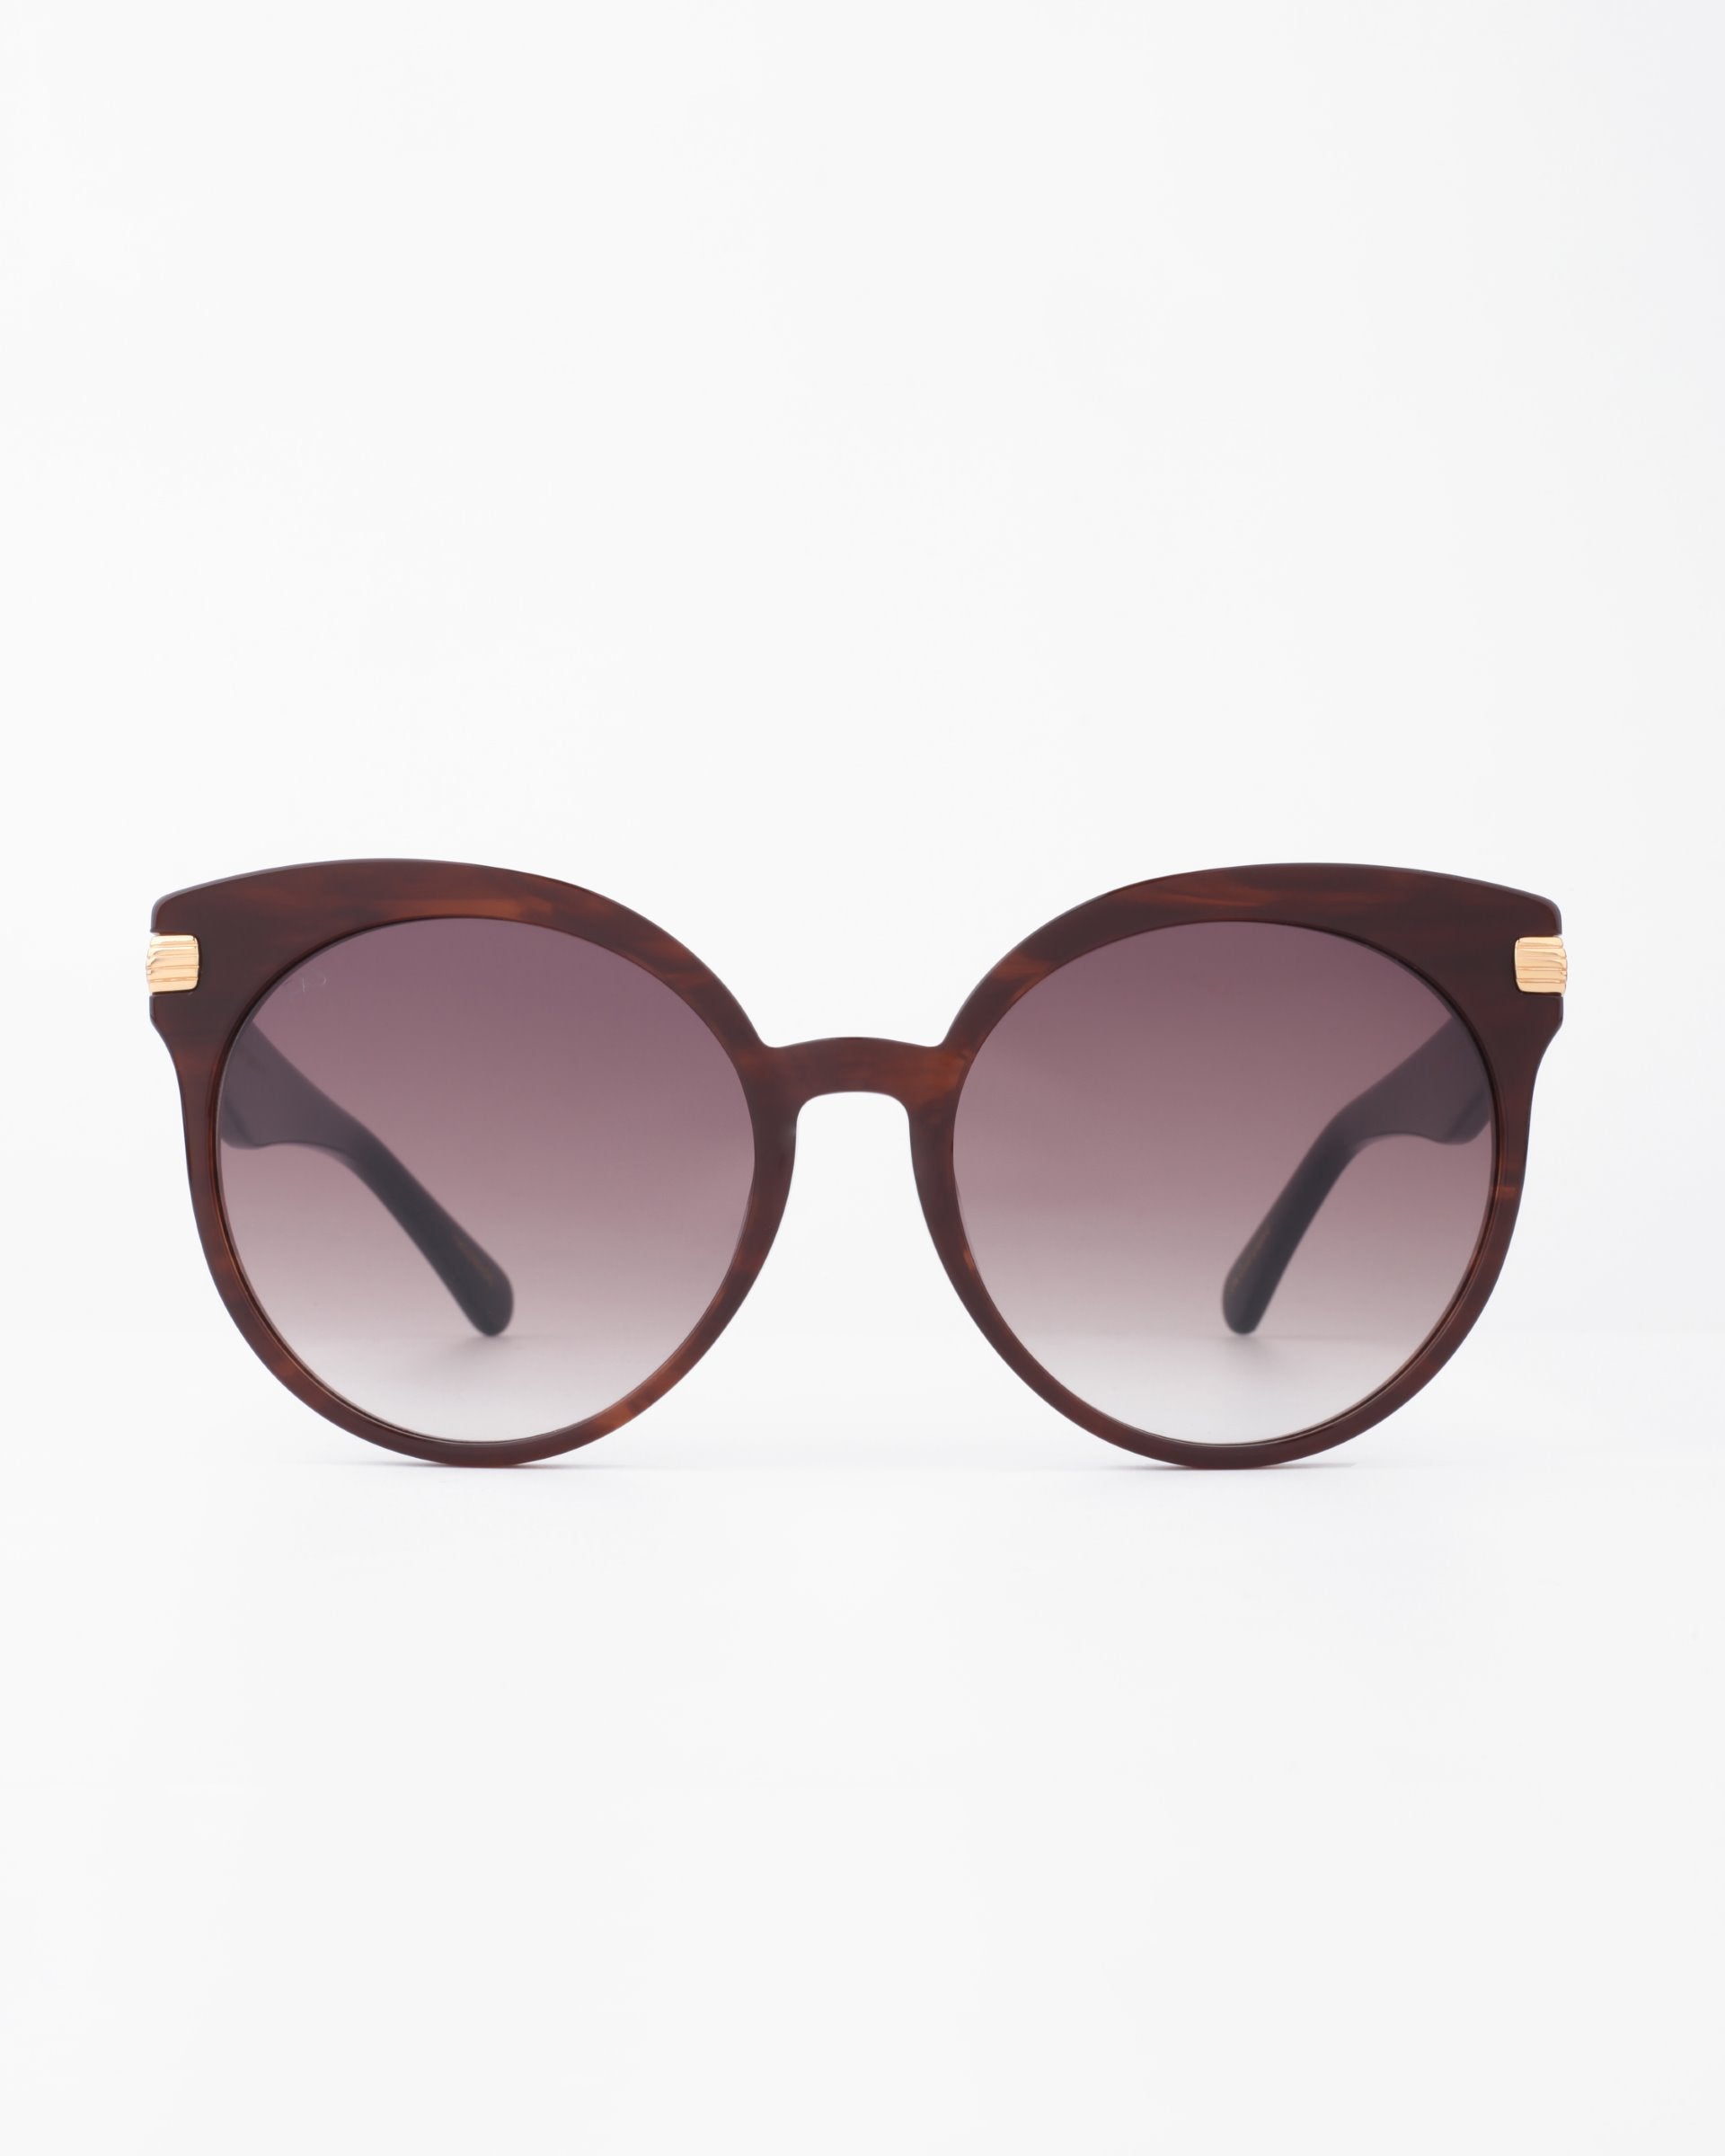 The Muse by For Art&#39;s Sake® is a pair of round brown sunglasses with gradient lenses, featuring 18-karat gold-plated temples. Crafted from handmade plant-based acetate, the Muse sunglasses are placed on a white surface with a minimalistic background.